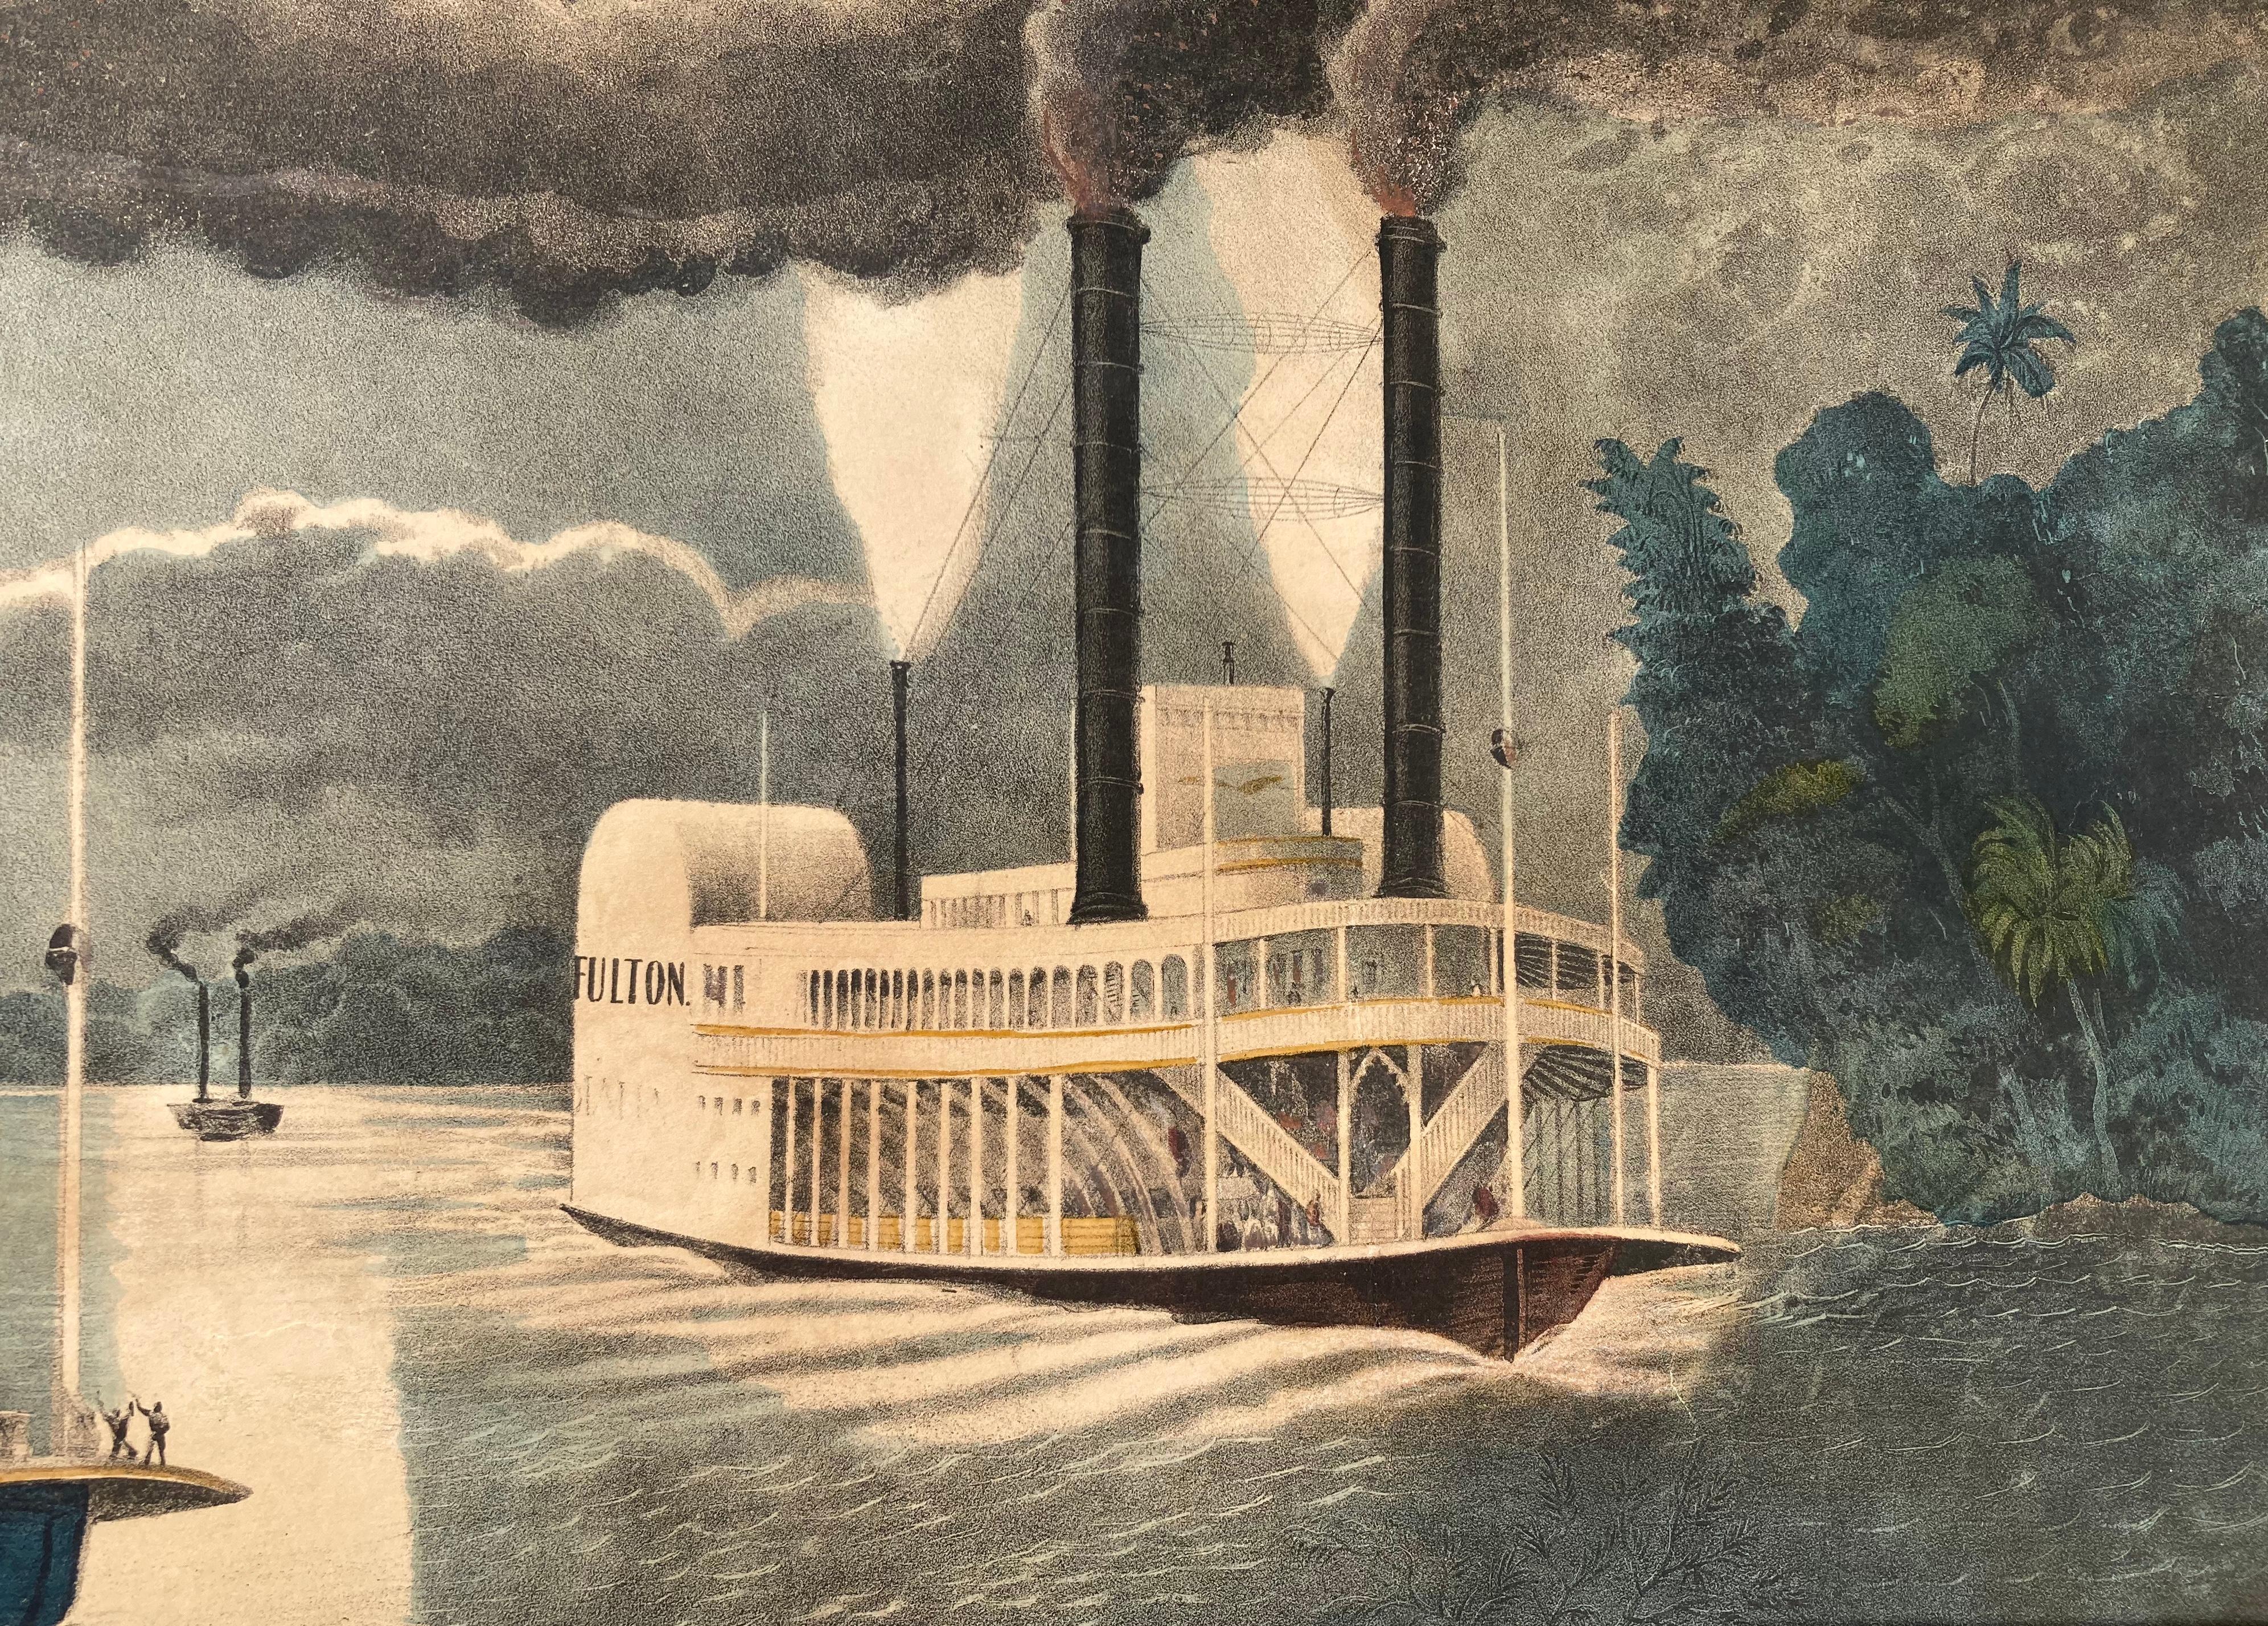 EXTREMELY RARE AMERICAN RIVERBOAT LITHOGRAPH - c 1870

MIDNIGHT RACE ON THE MISSISSIPPI c 1870
Lithograph with hand coloring and gum arabic highlights. Large folio, image 18 ¼ x 25 ¼ plus title.
Publ. & Print. by Th Kelly, 17 Barclay St. NY. Kelly’s